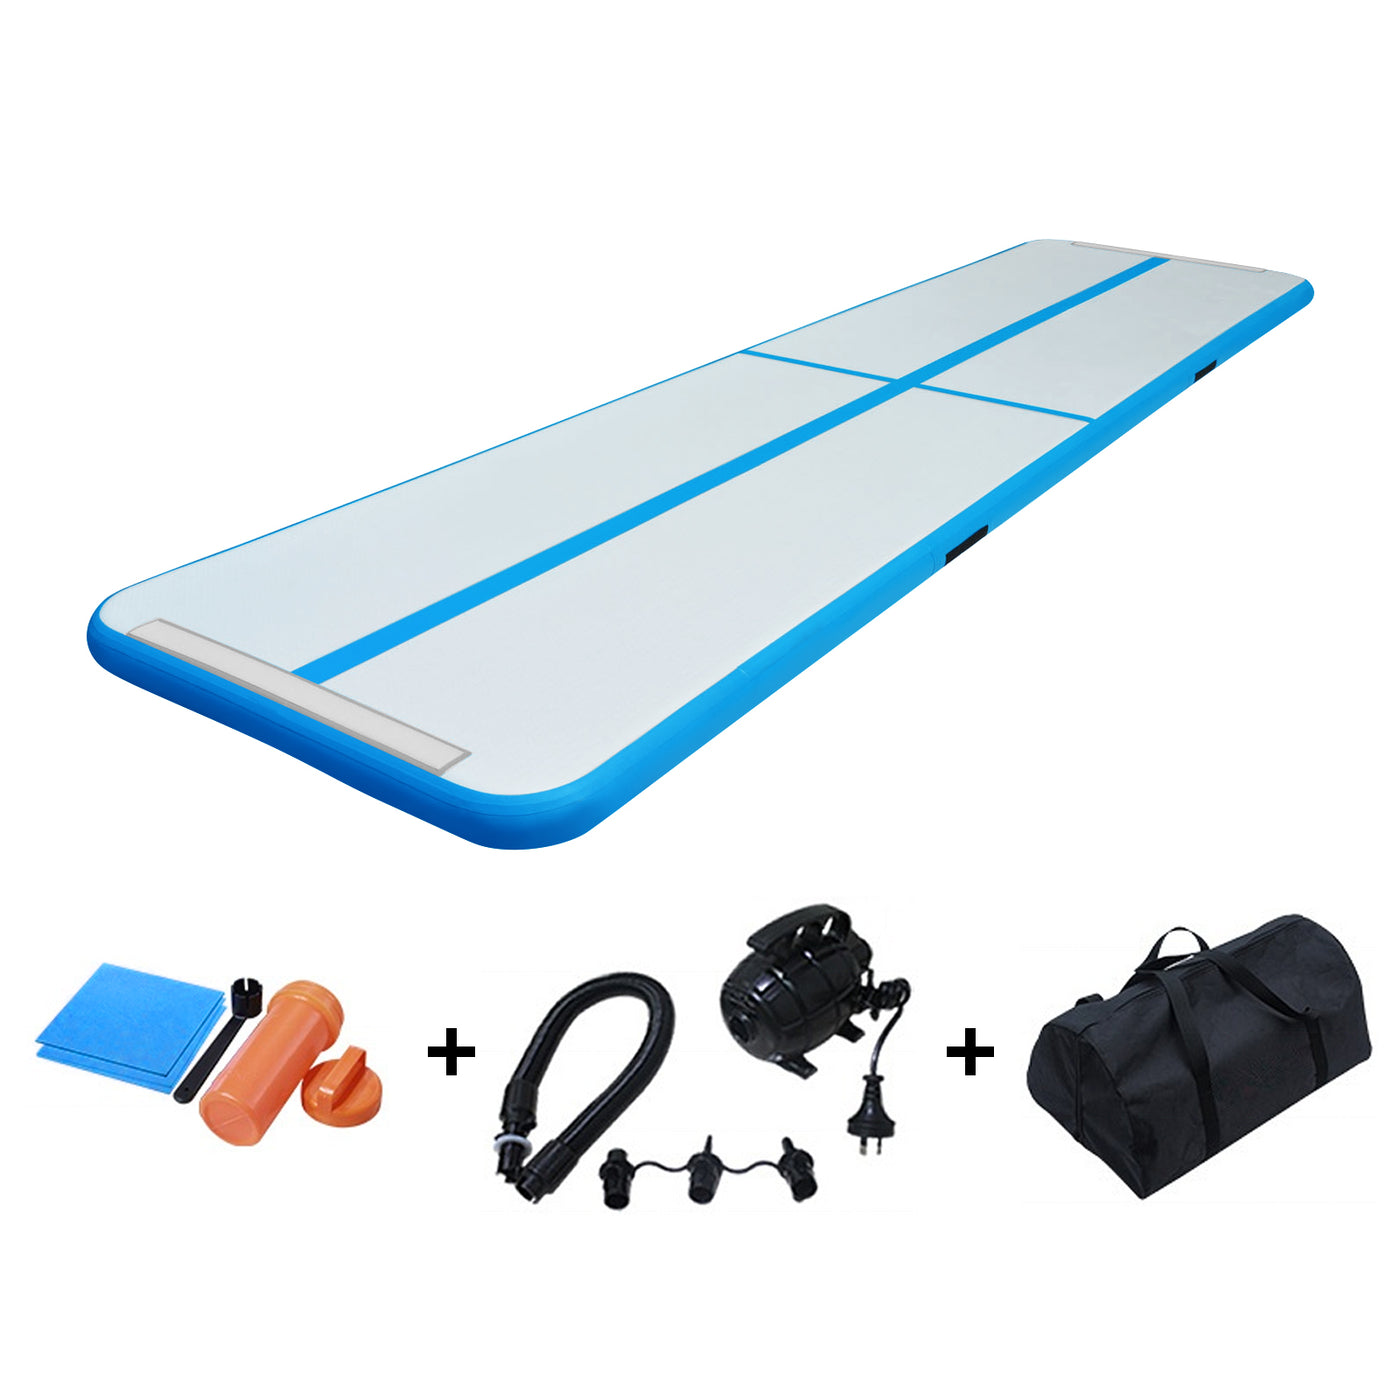 10ft Mat 4 Inches Thickness Inflatable Gymnastics Tumbling Mats with Electric Air Pump and Bag